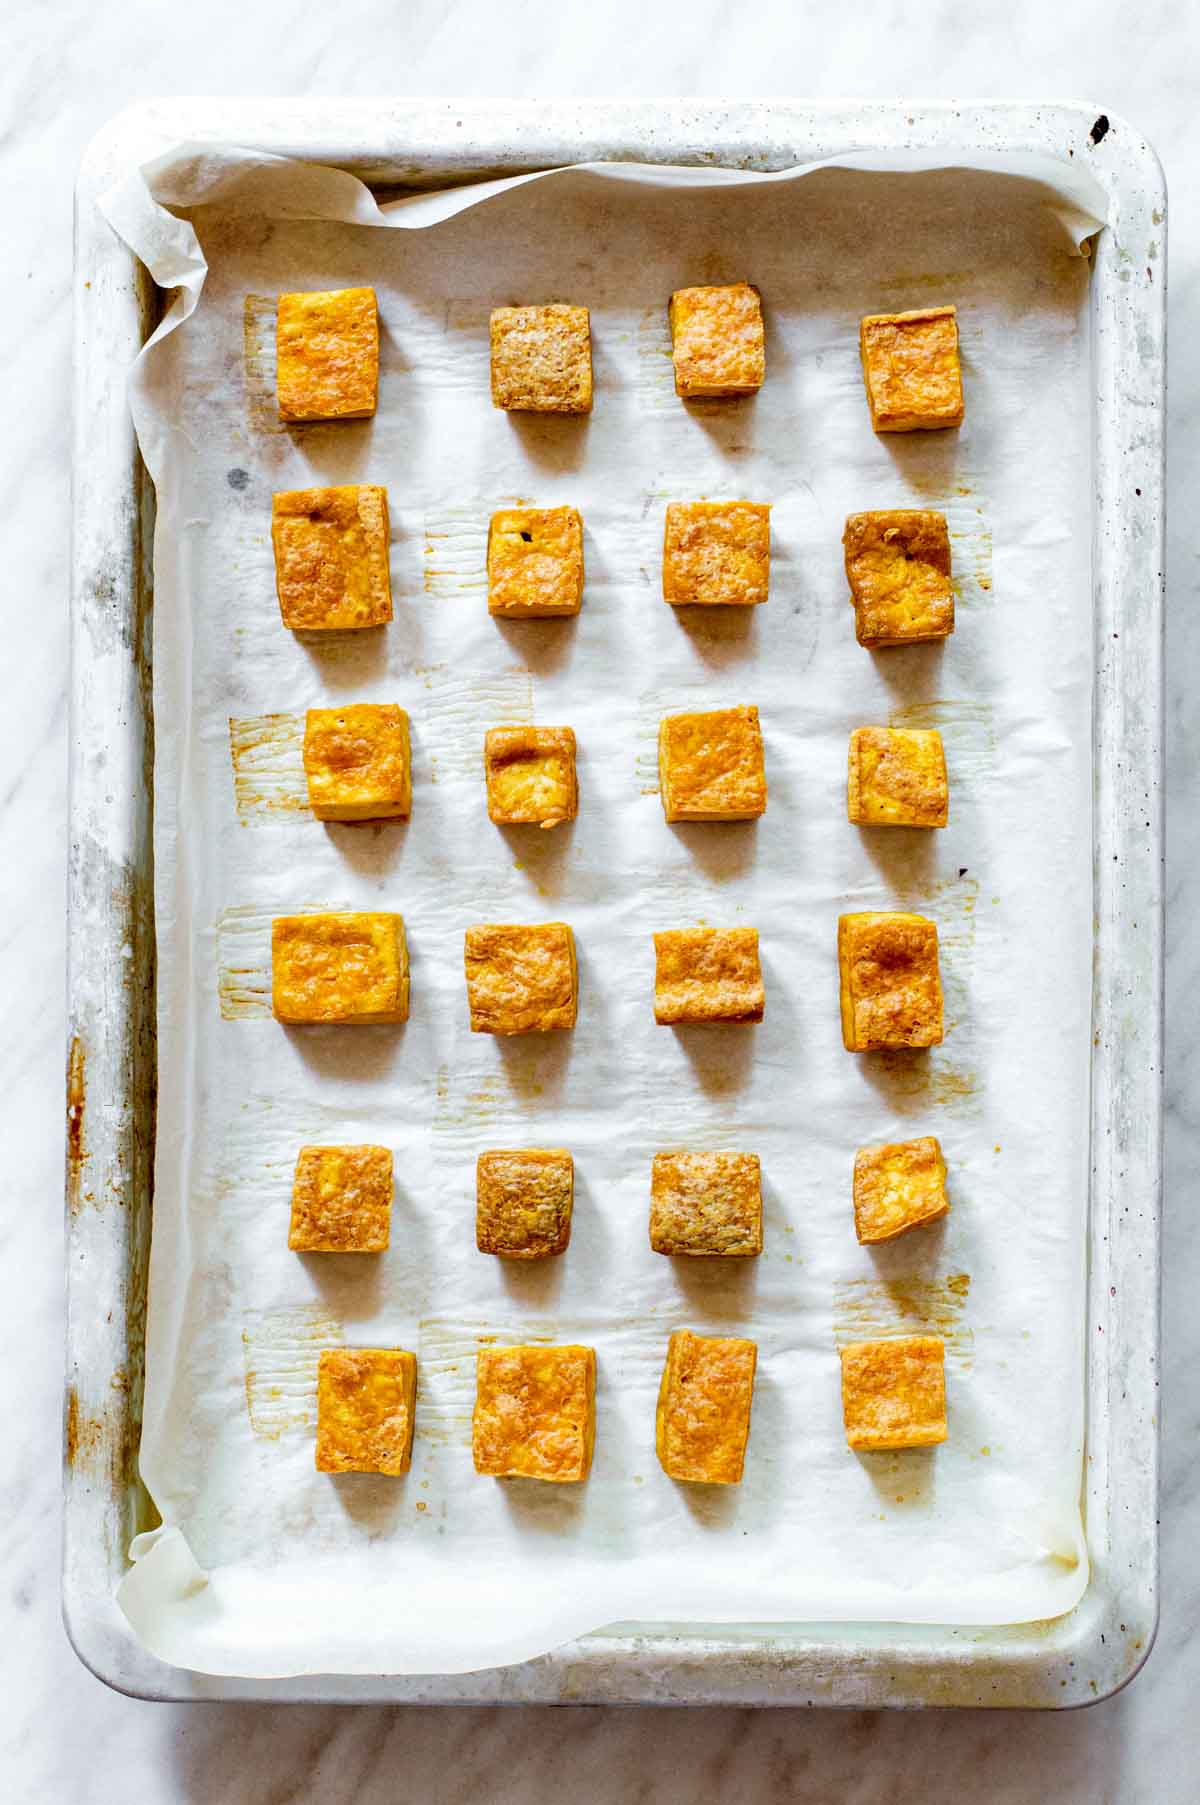 Baked tofu cubes on a baking sheet layered with parchment paper.